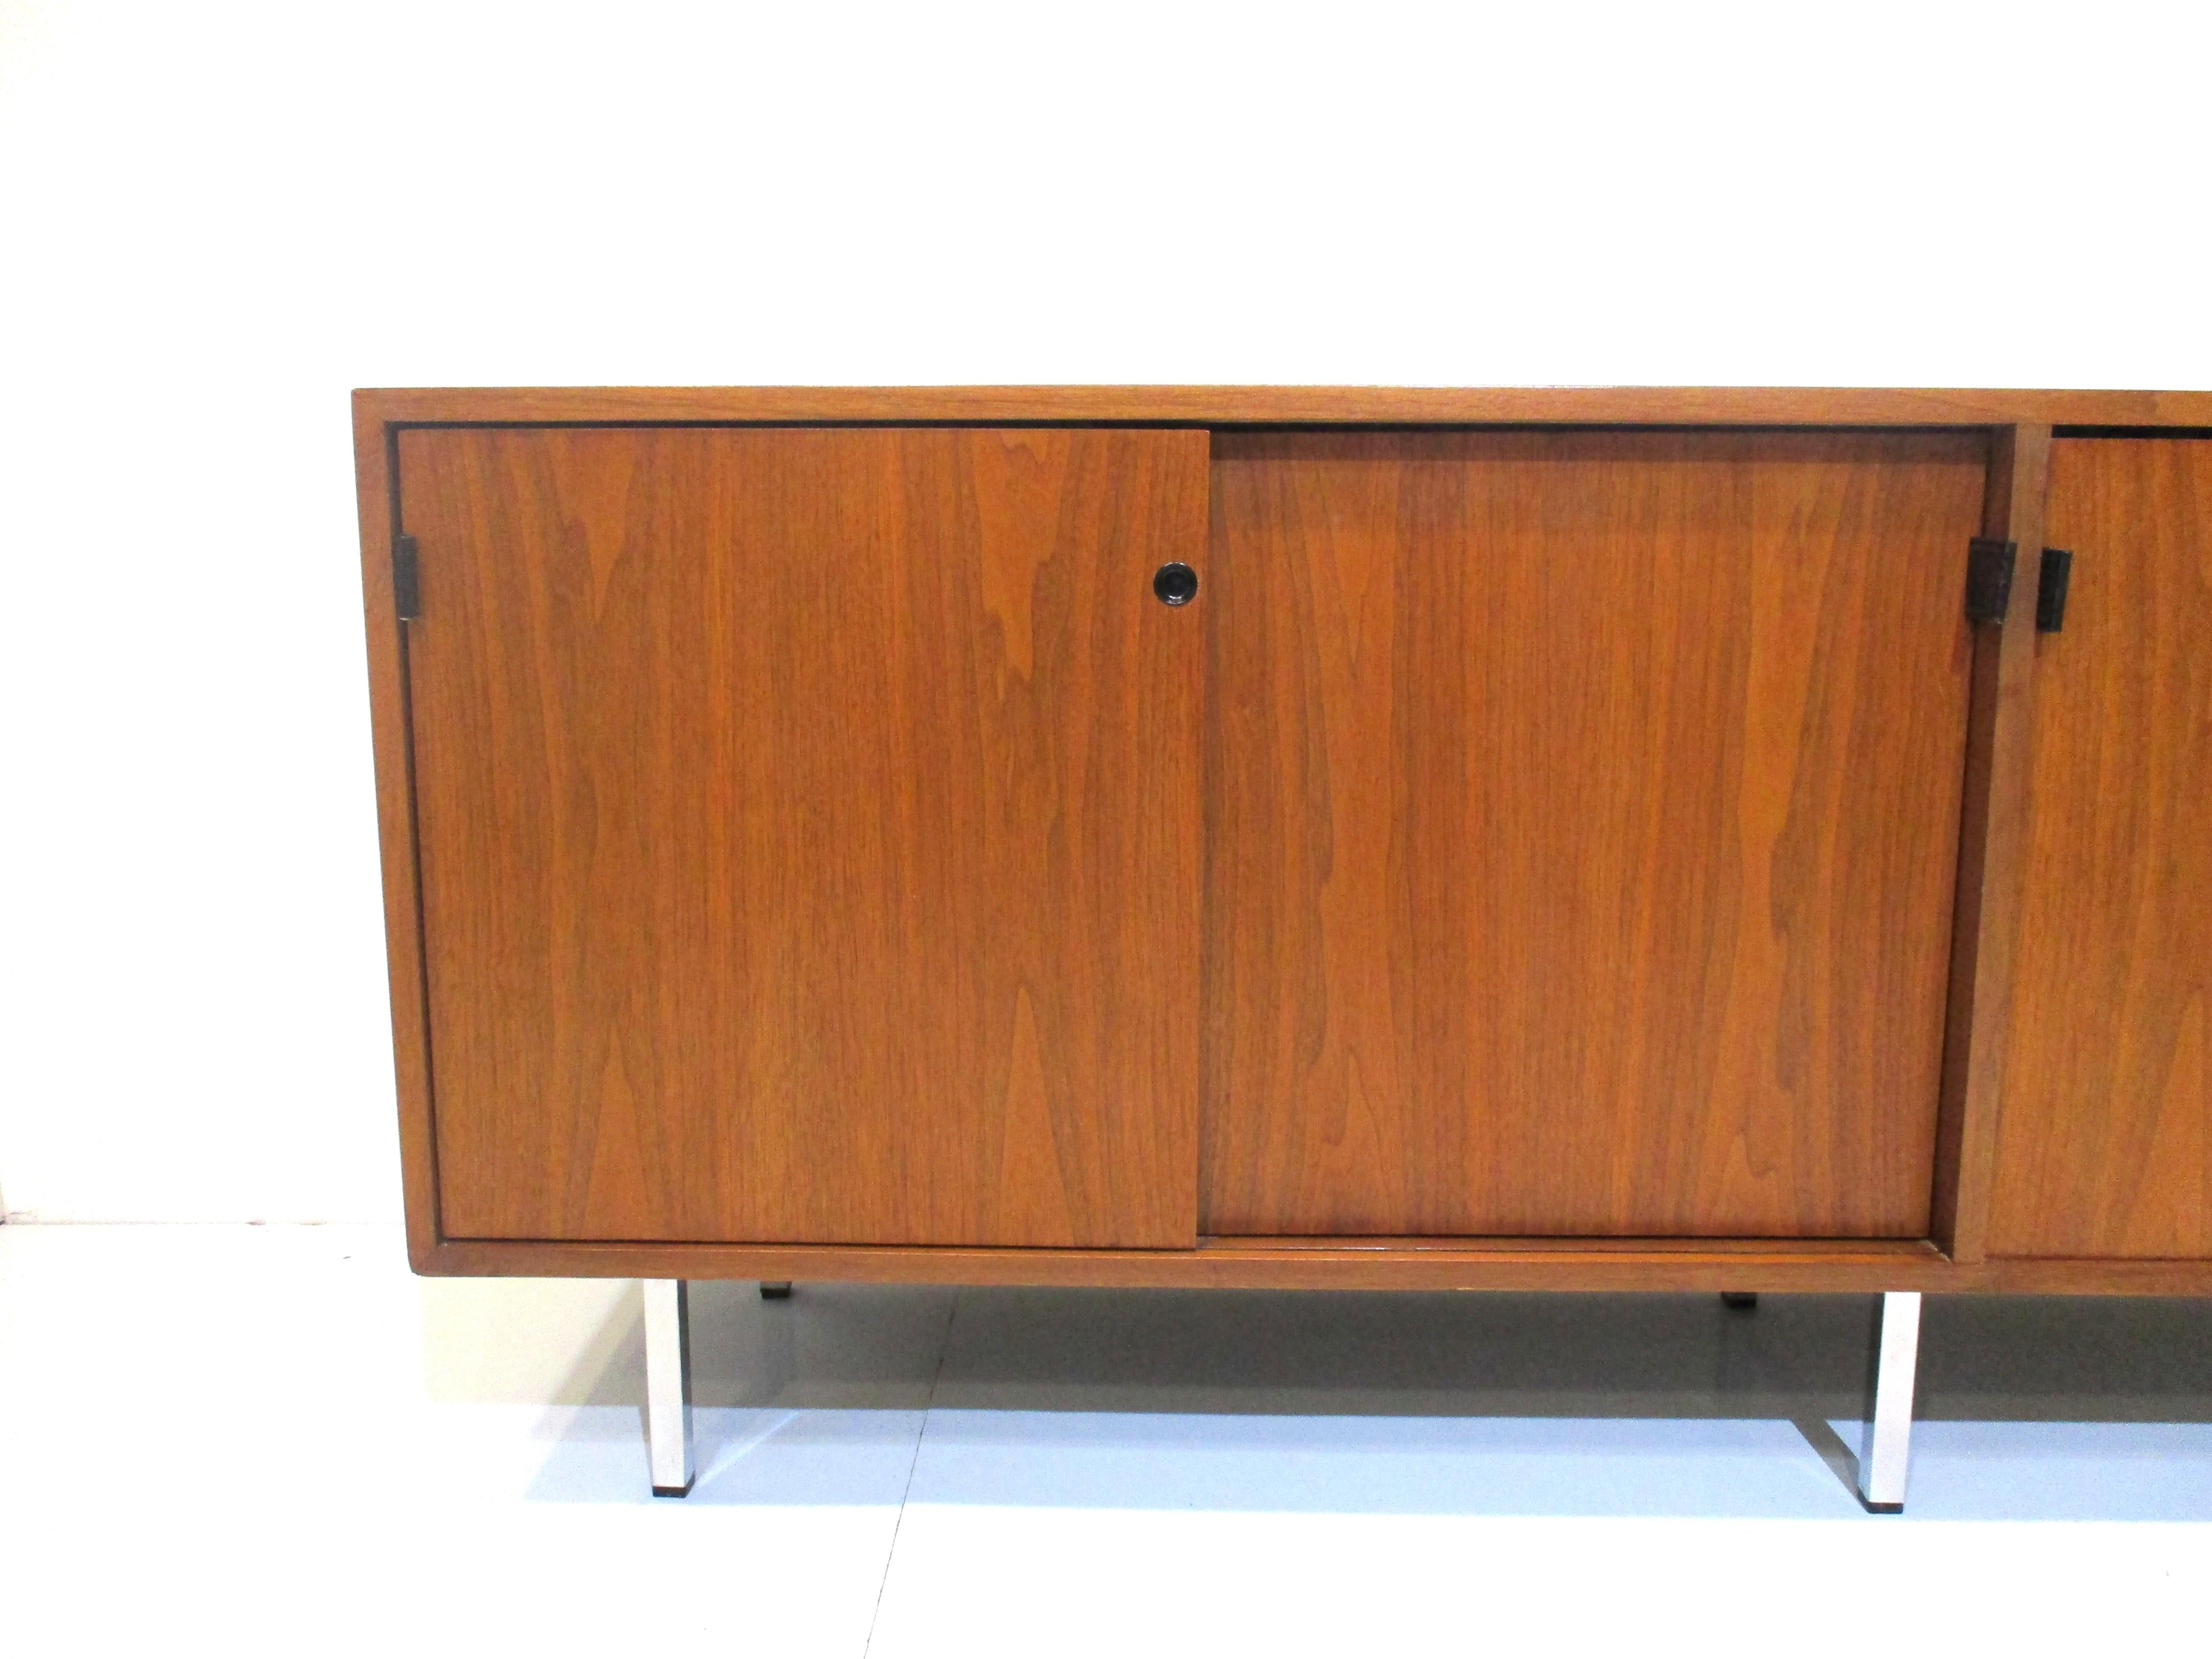 A very well crafted walnut credenza / sideboard with four sliding doors revealing three sections with adjustable shelves and one with four drawers all in a lighter oak tone giving the piece some drama . Black leather pulls open each door all sitting